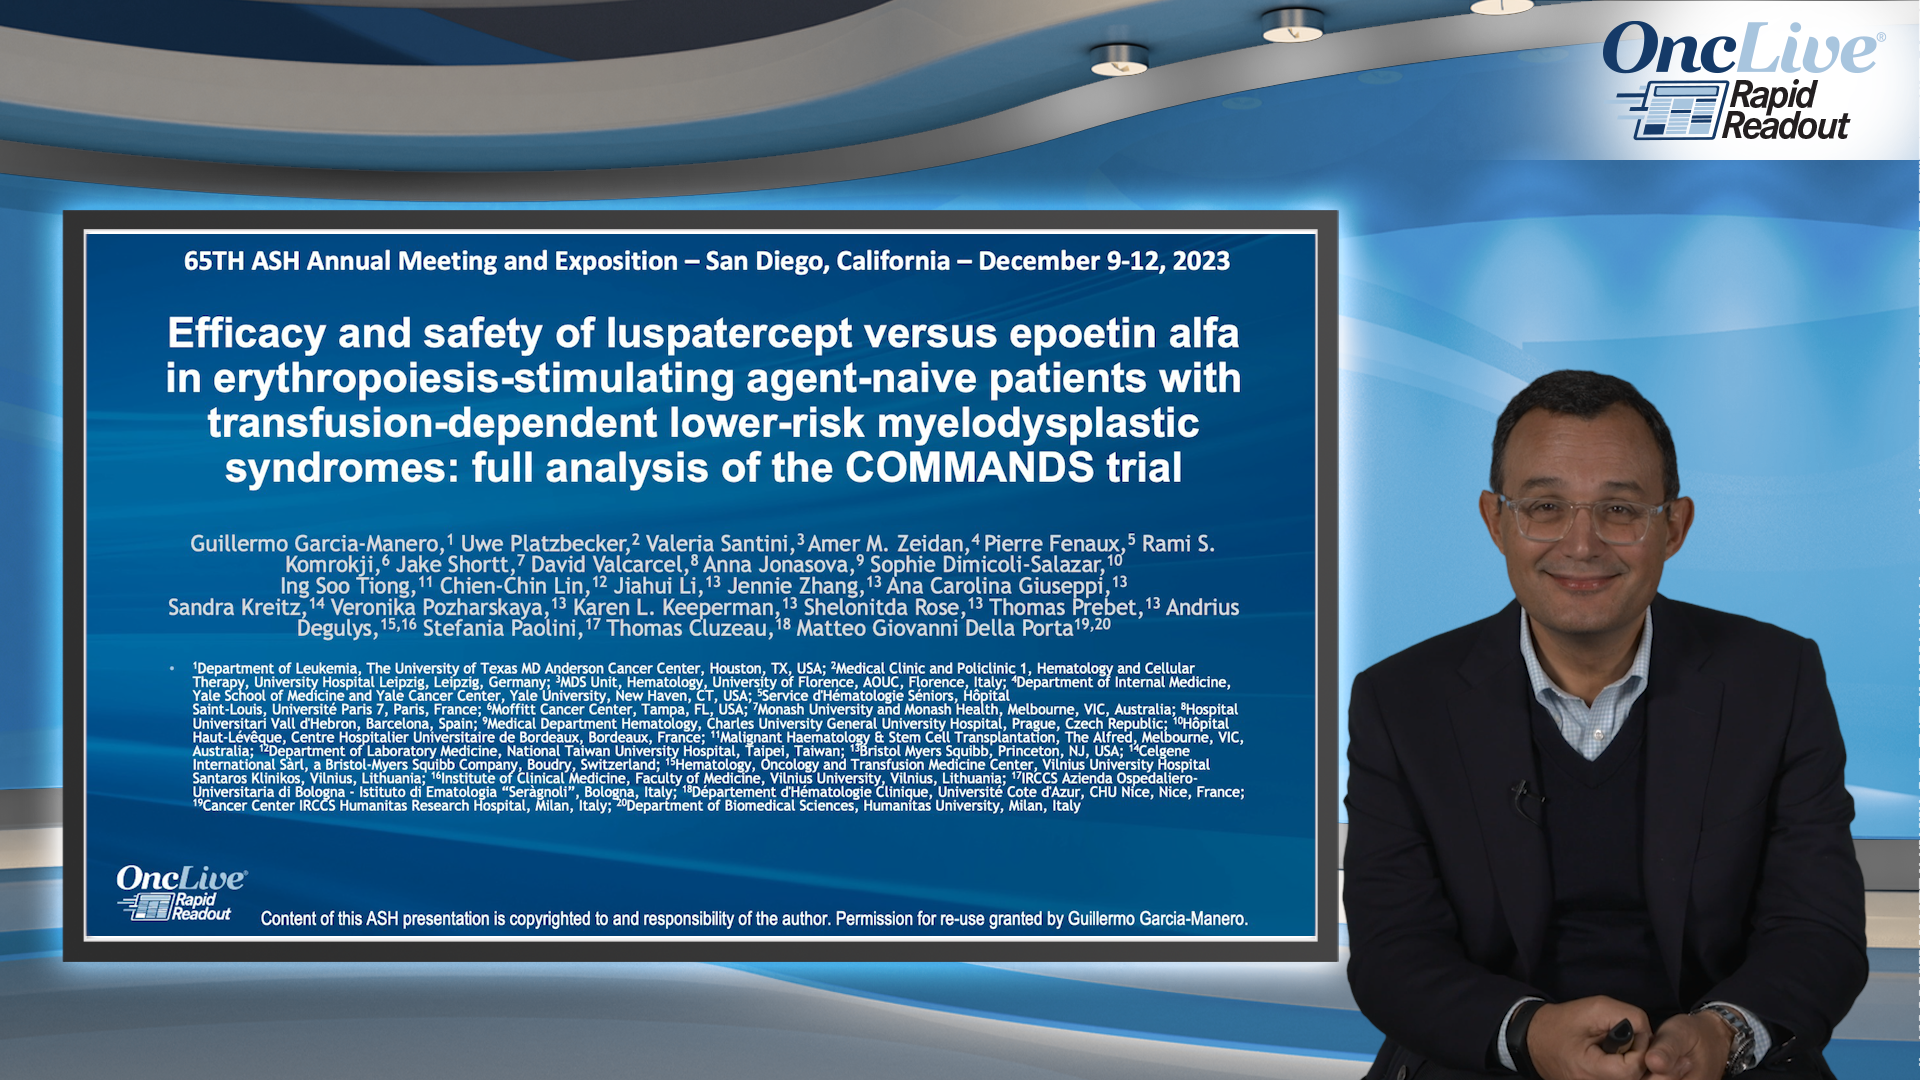 Guillermo Garcia-Manero, MD, an expert on myelodysplastic syndromes